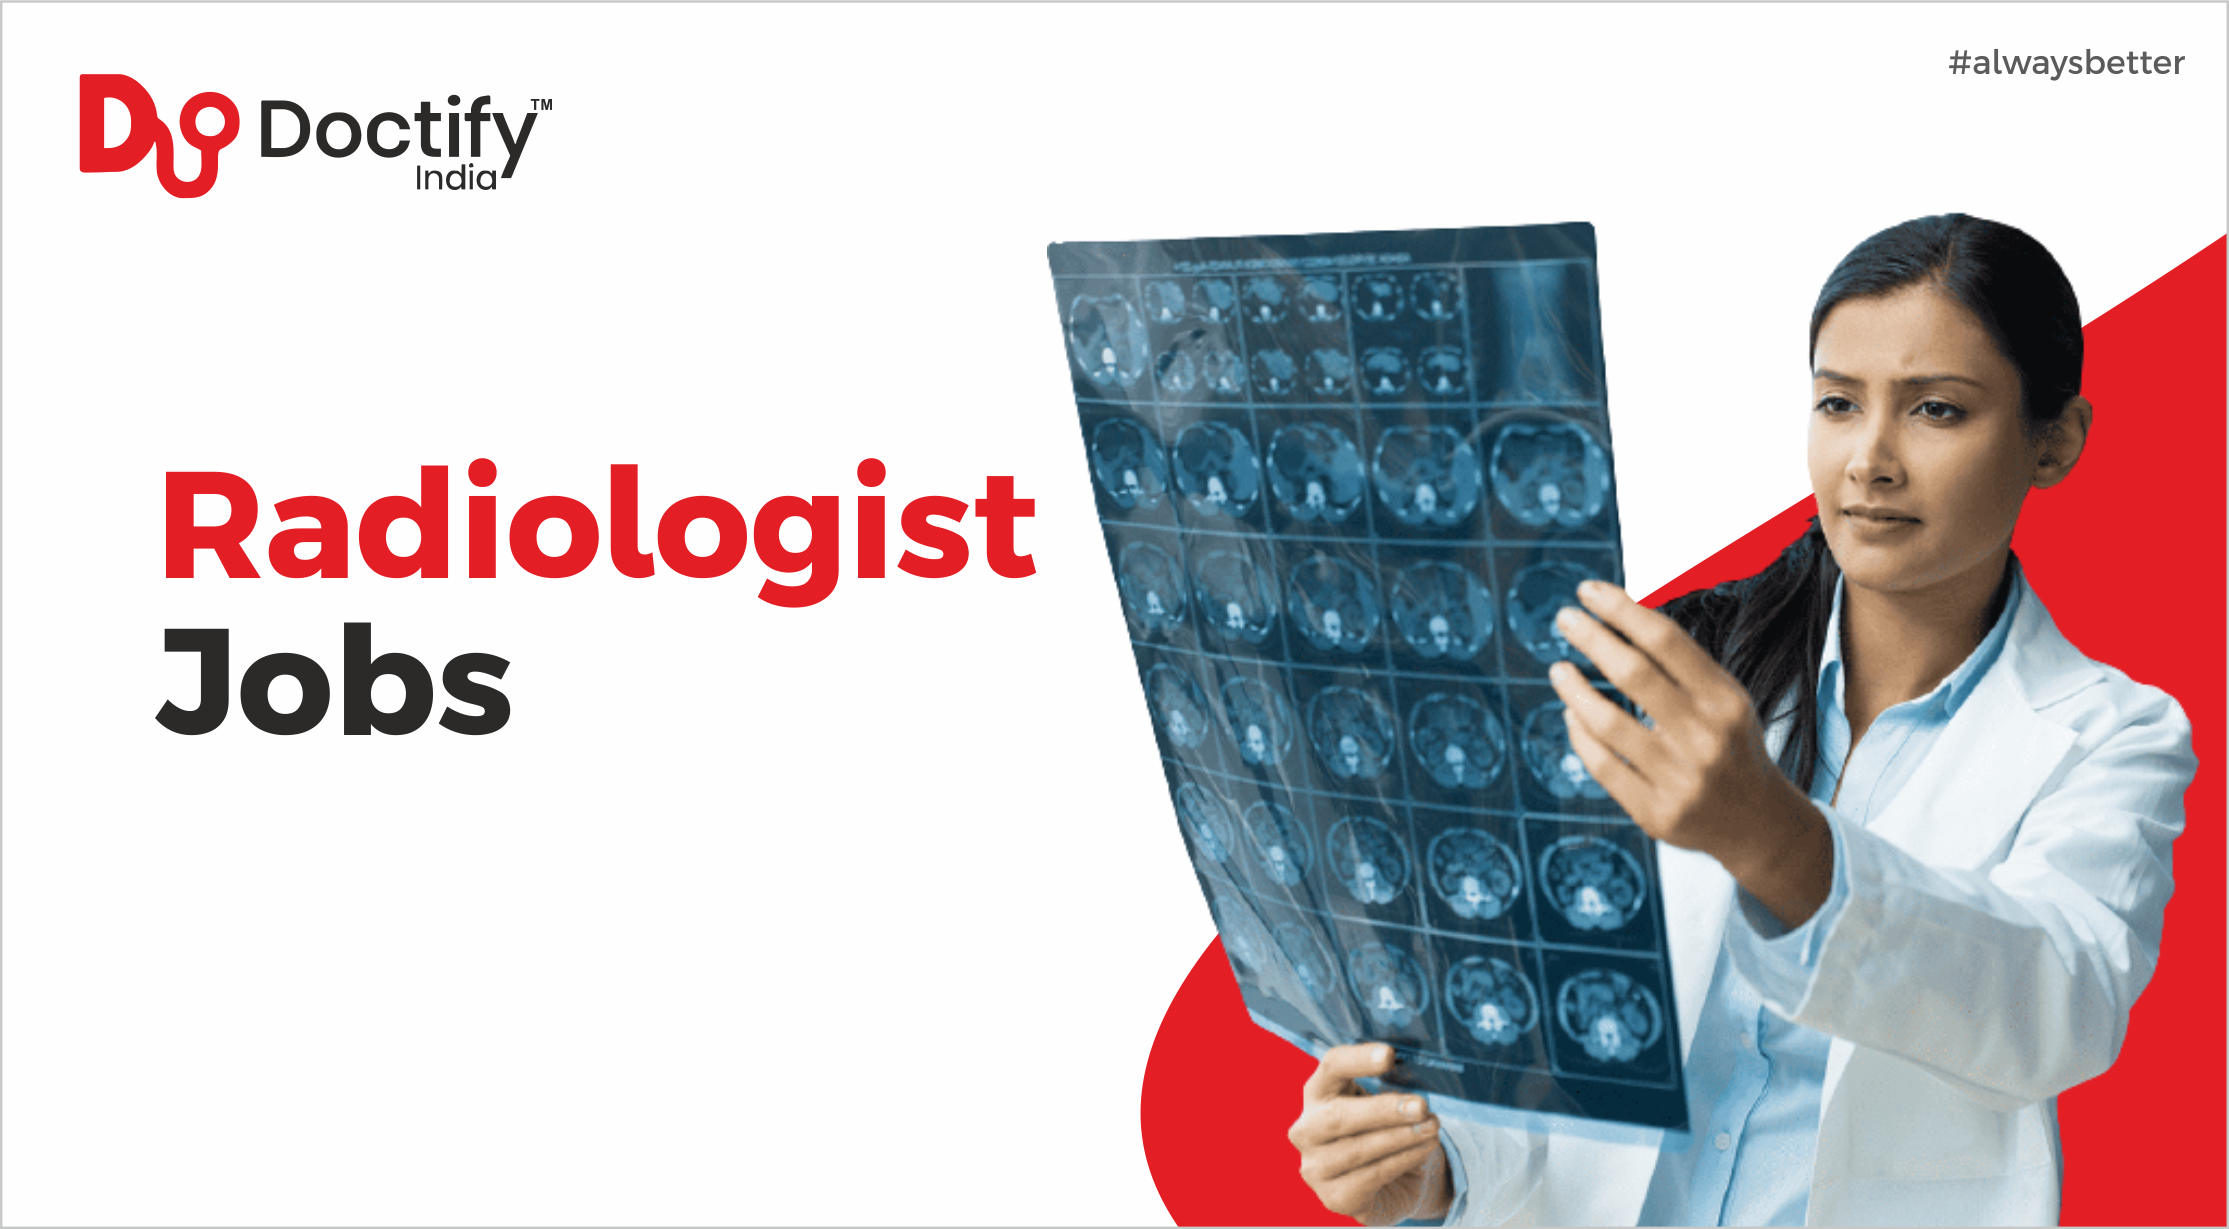 Apply For The Latest 30 New Radiologist Jobs - Doctify India